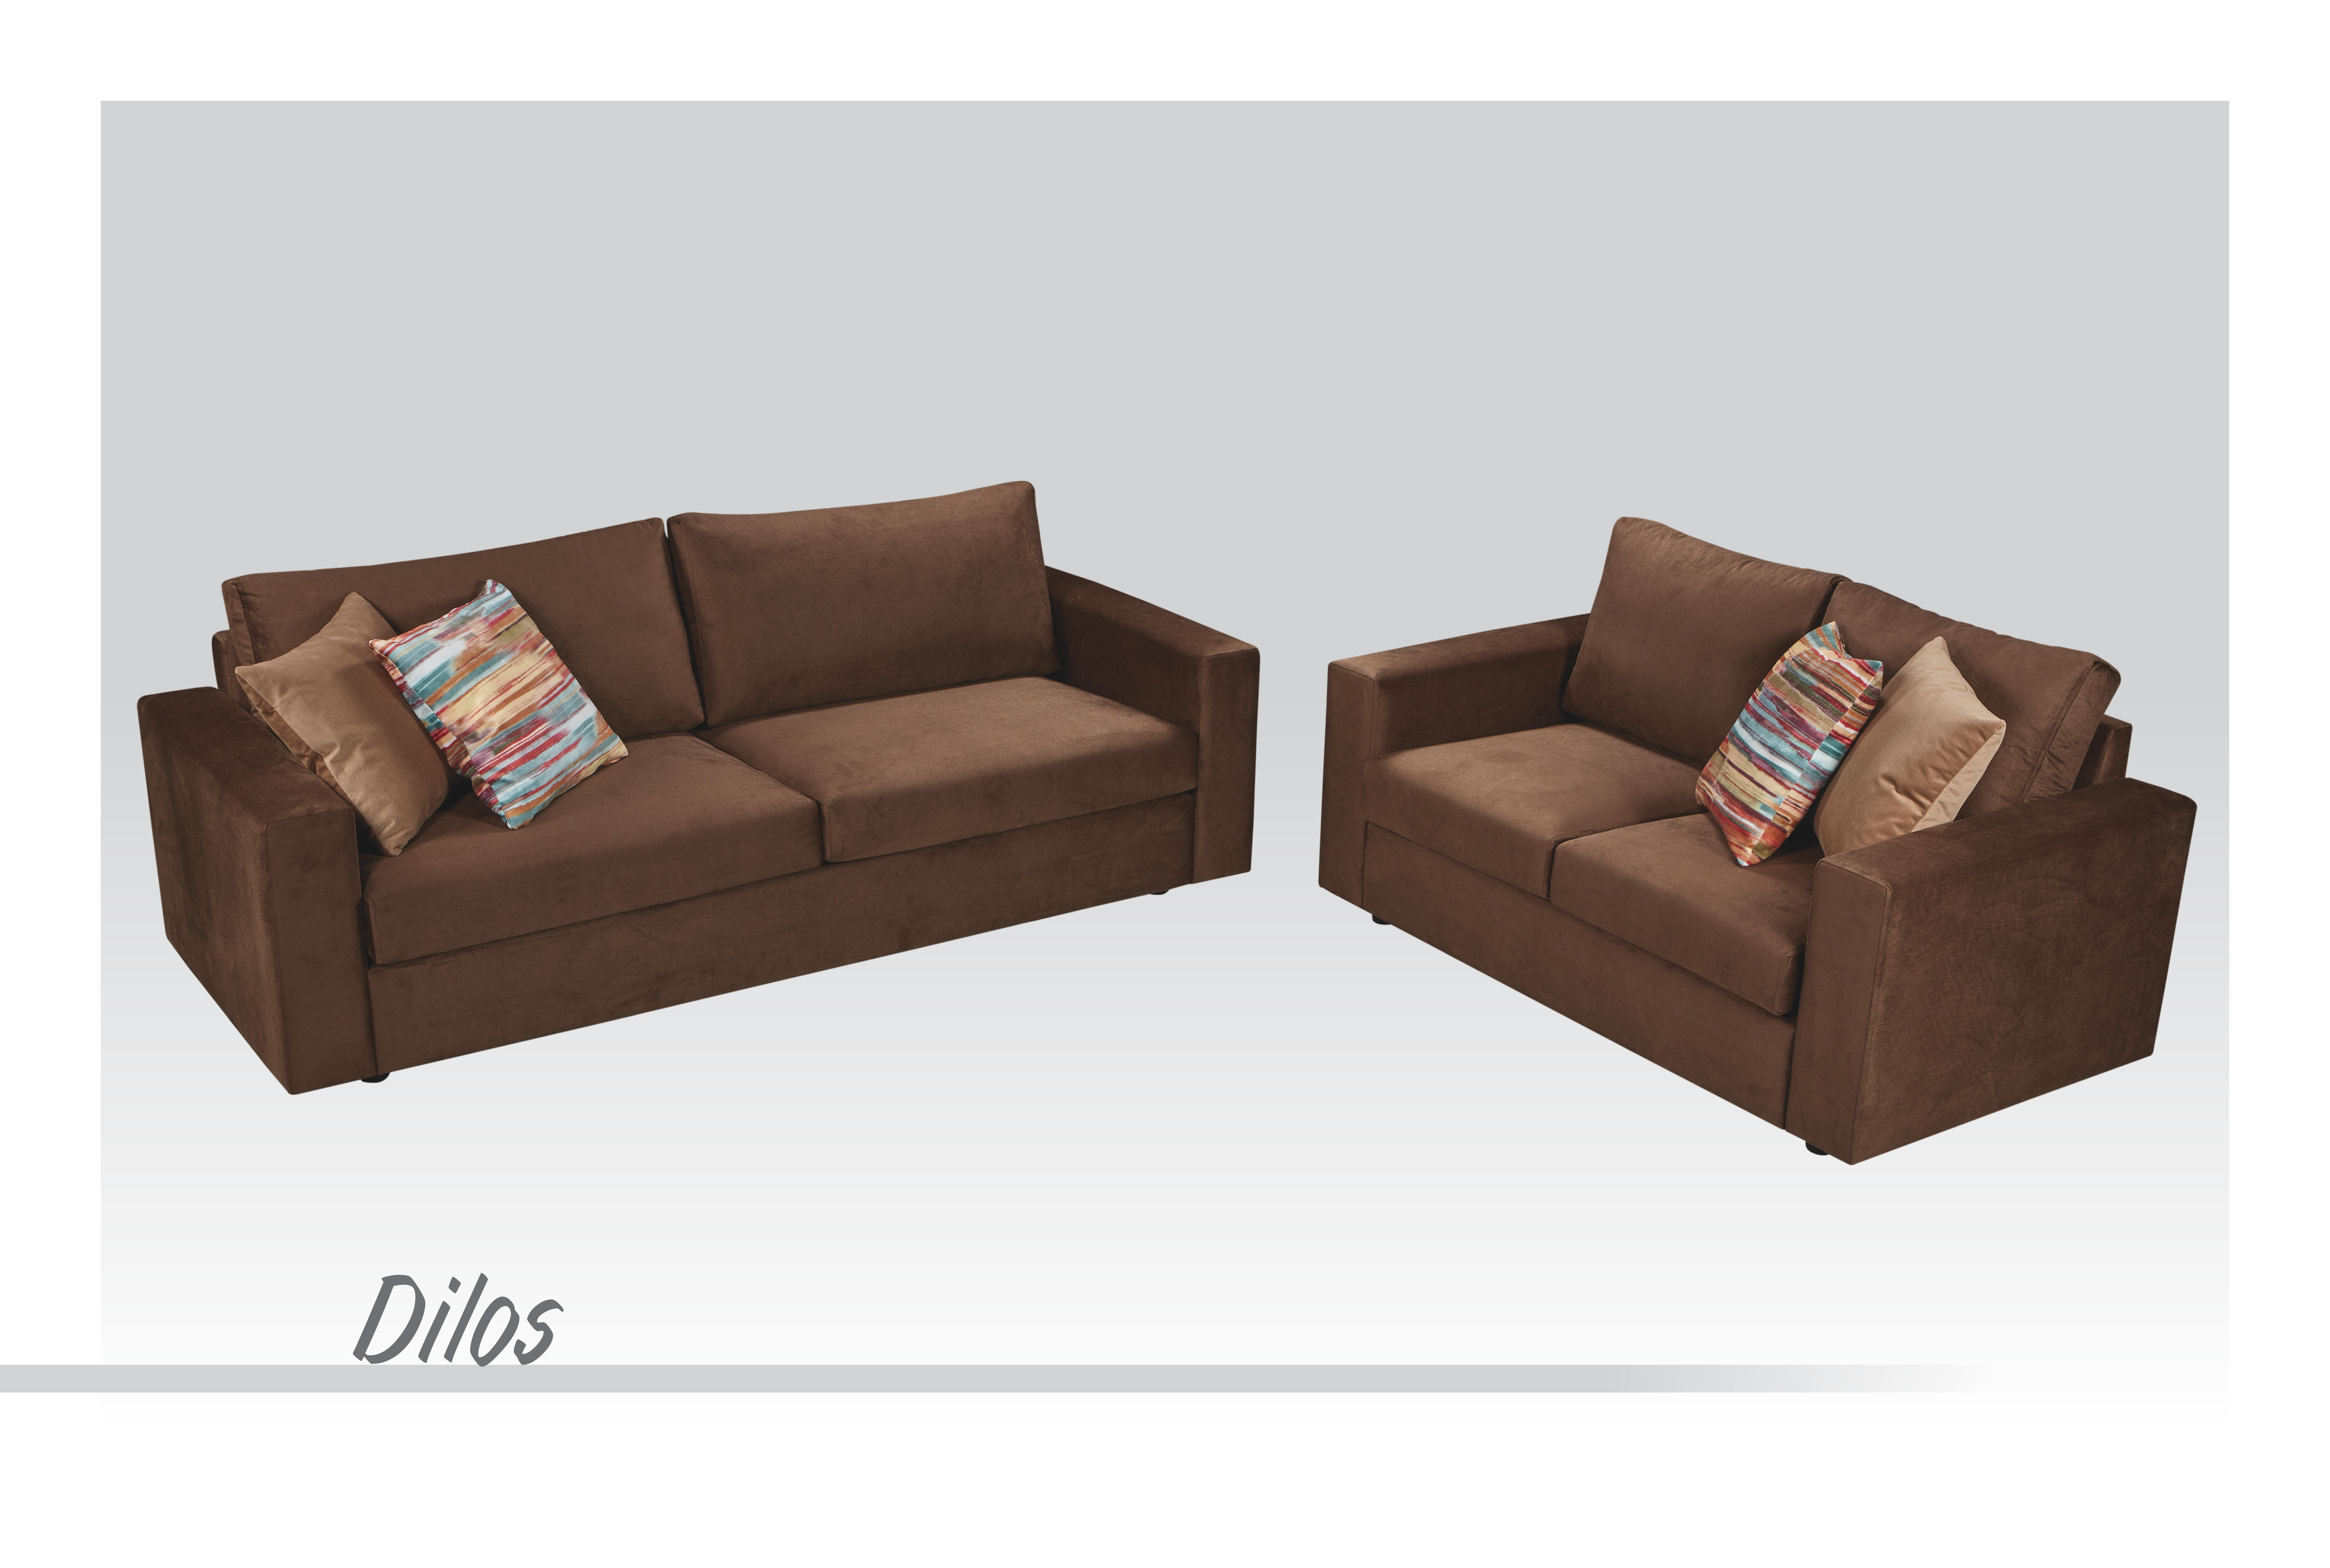 3-seated & 2-seated sofas "Dilos"